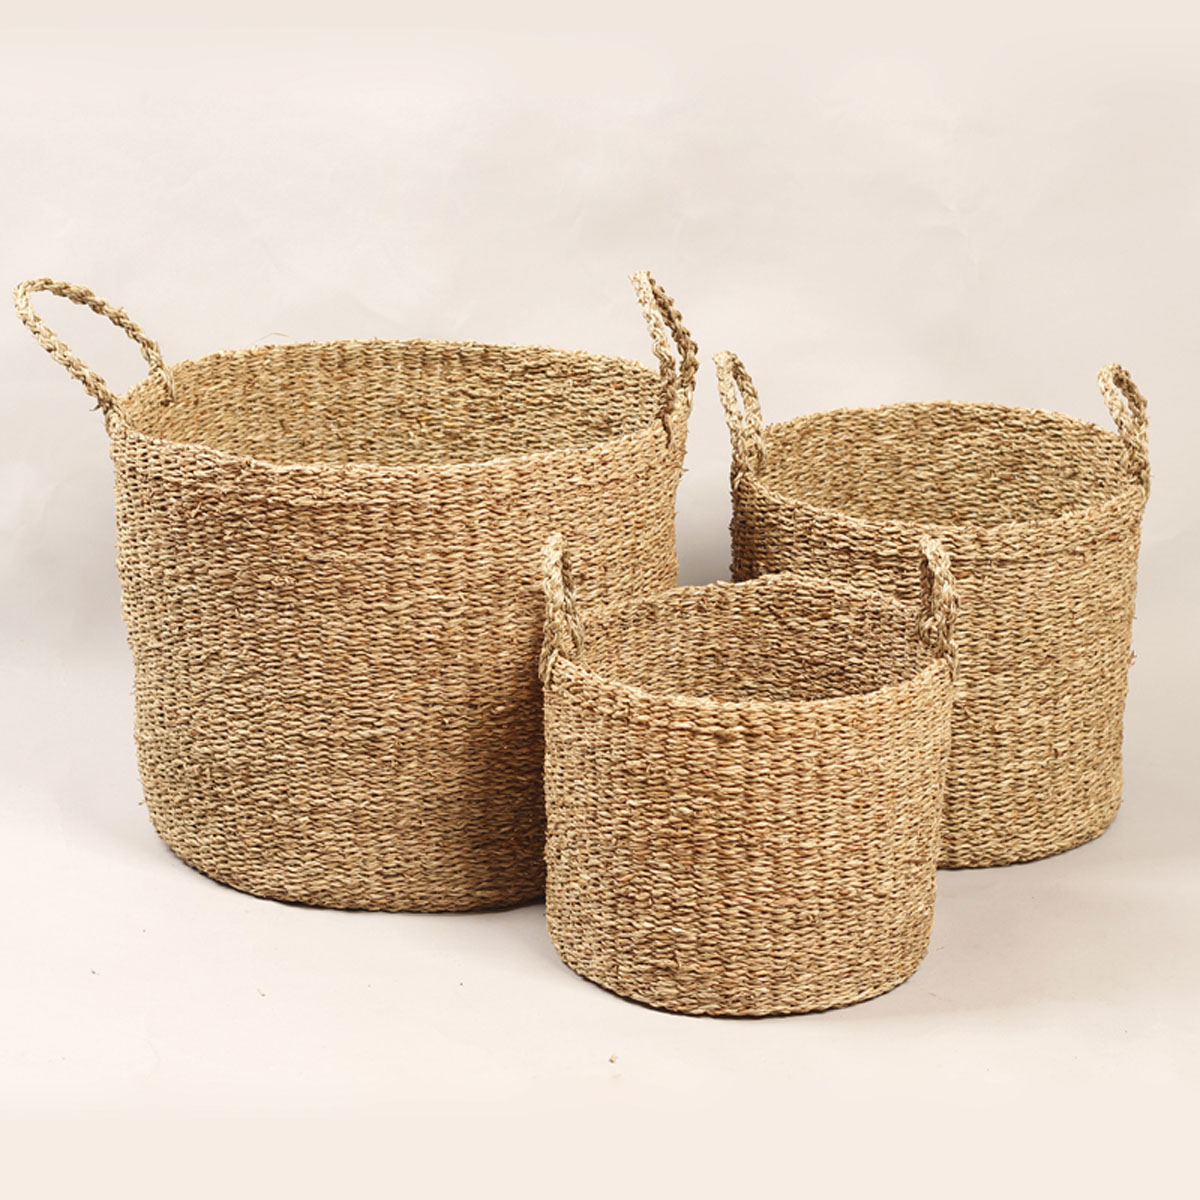 Wholesale High Quality Seagrass Belly Basket In Green From Vietnam SG 06 05 238 01